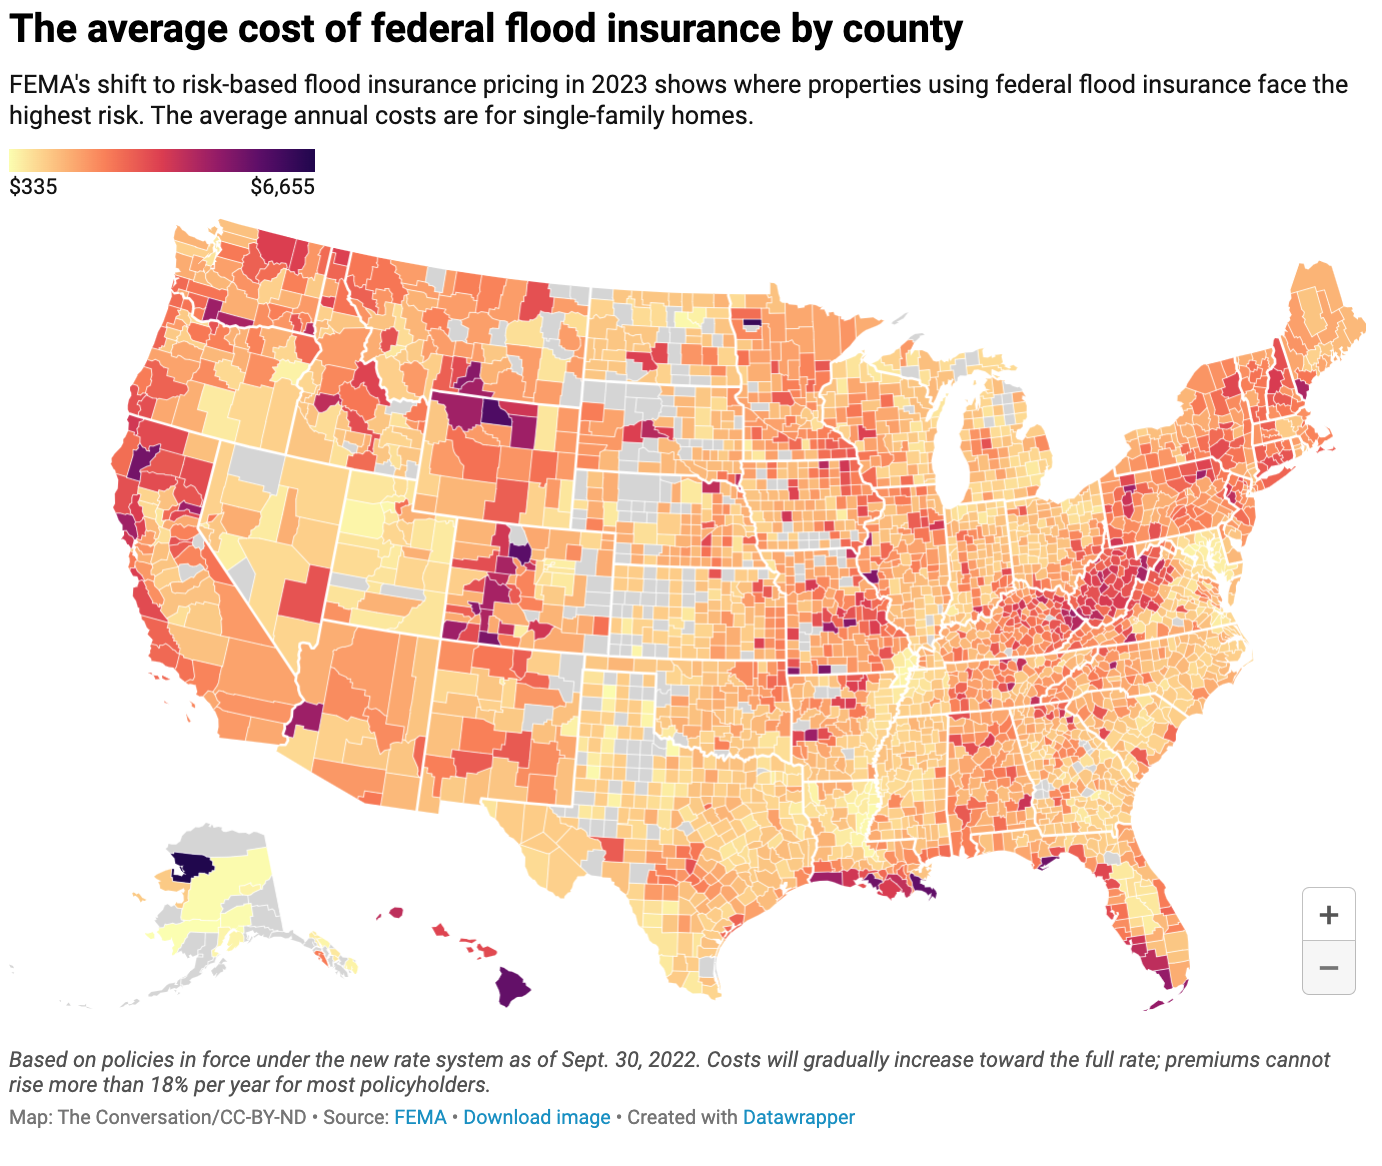 The average cost of federal flood insurance by county (Source: The Conversation)